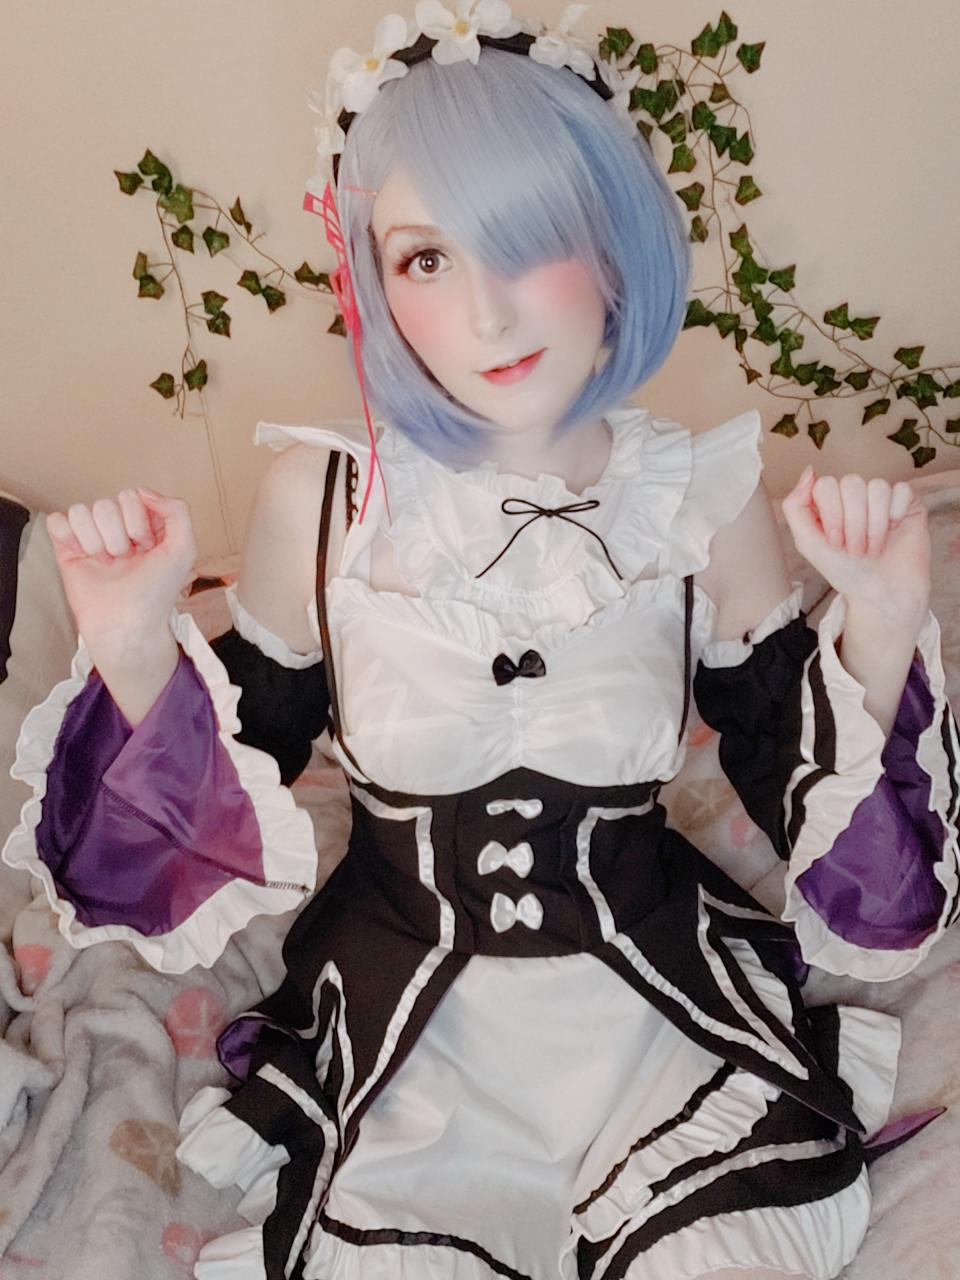 Rem Cosplay By Gintk